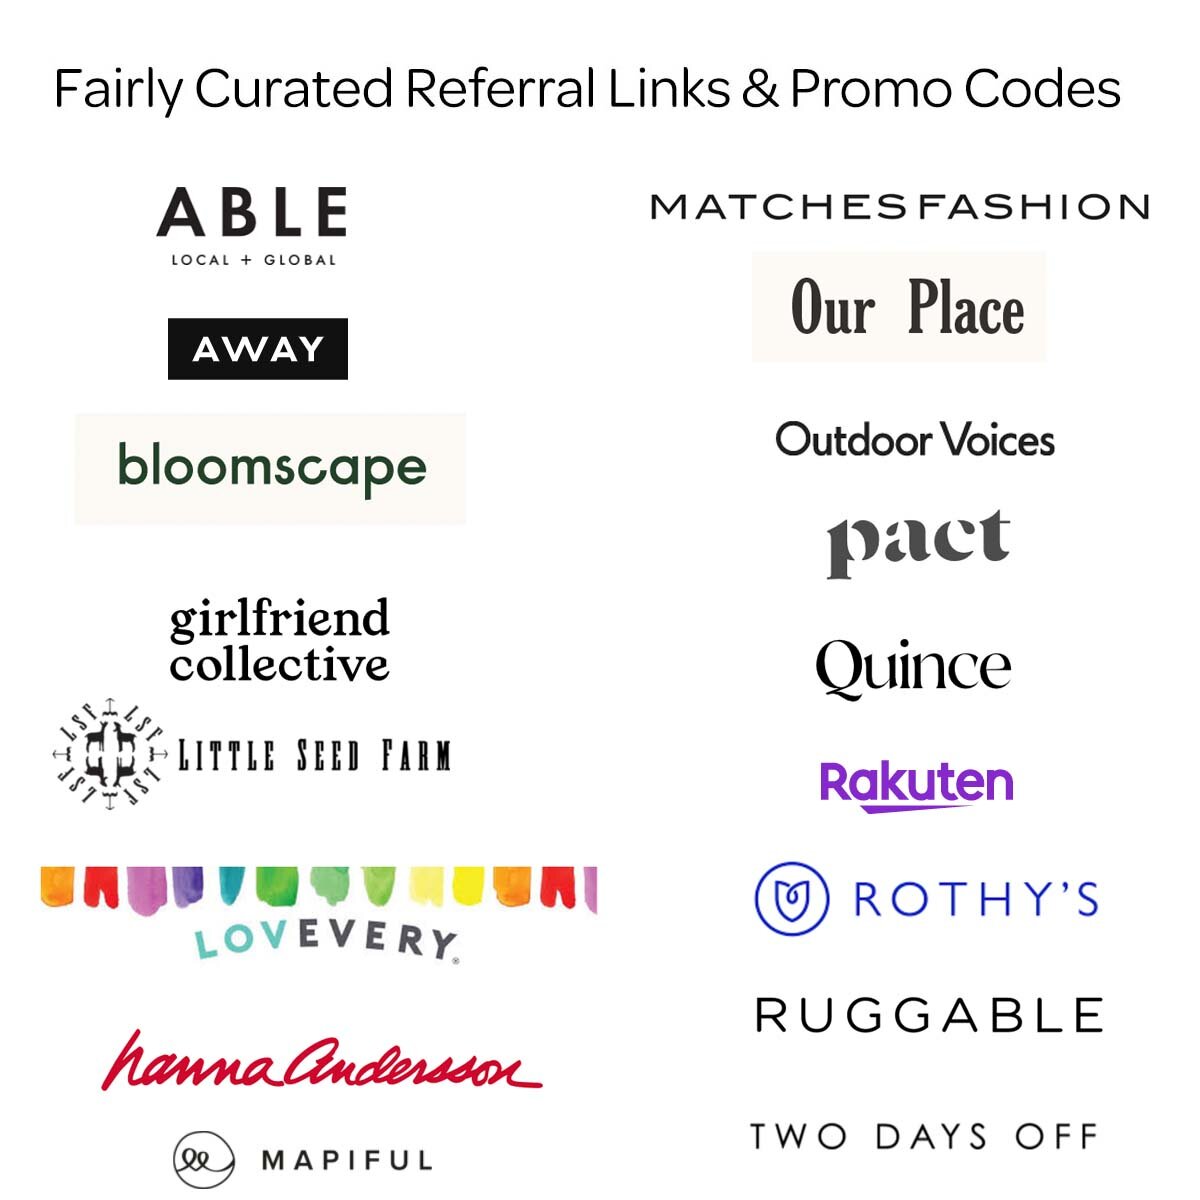 Fairly Curated Referral Links & Promo Codes — Fairly Curated